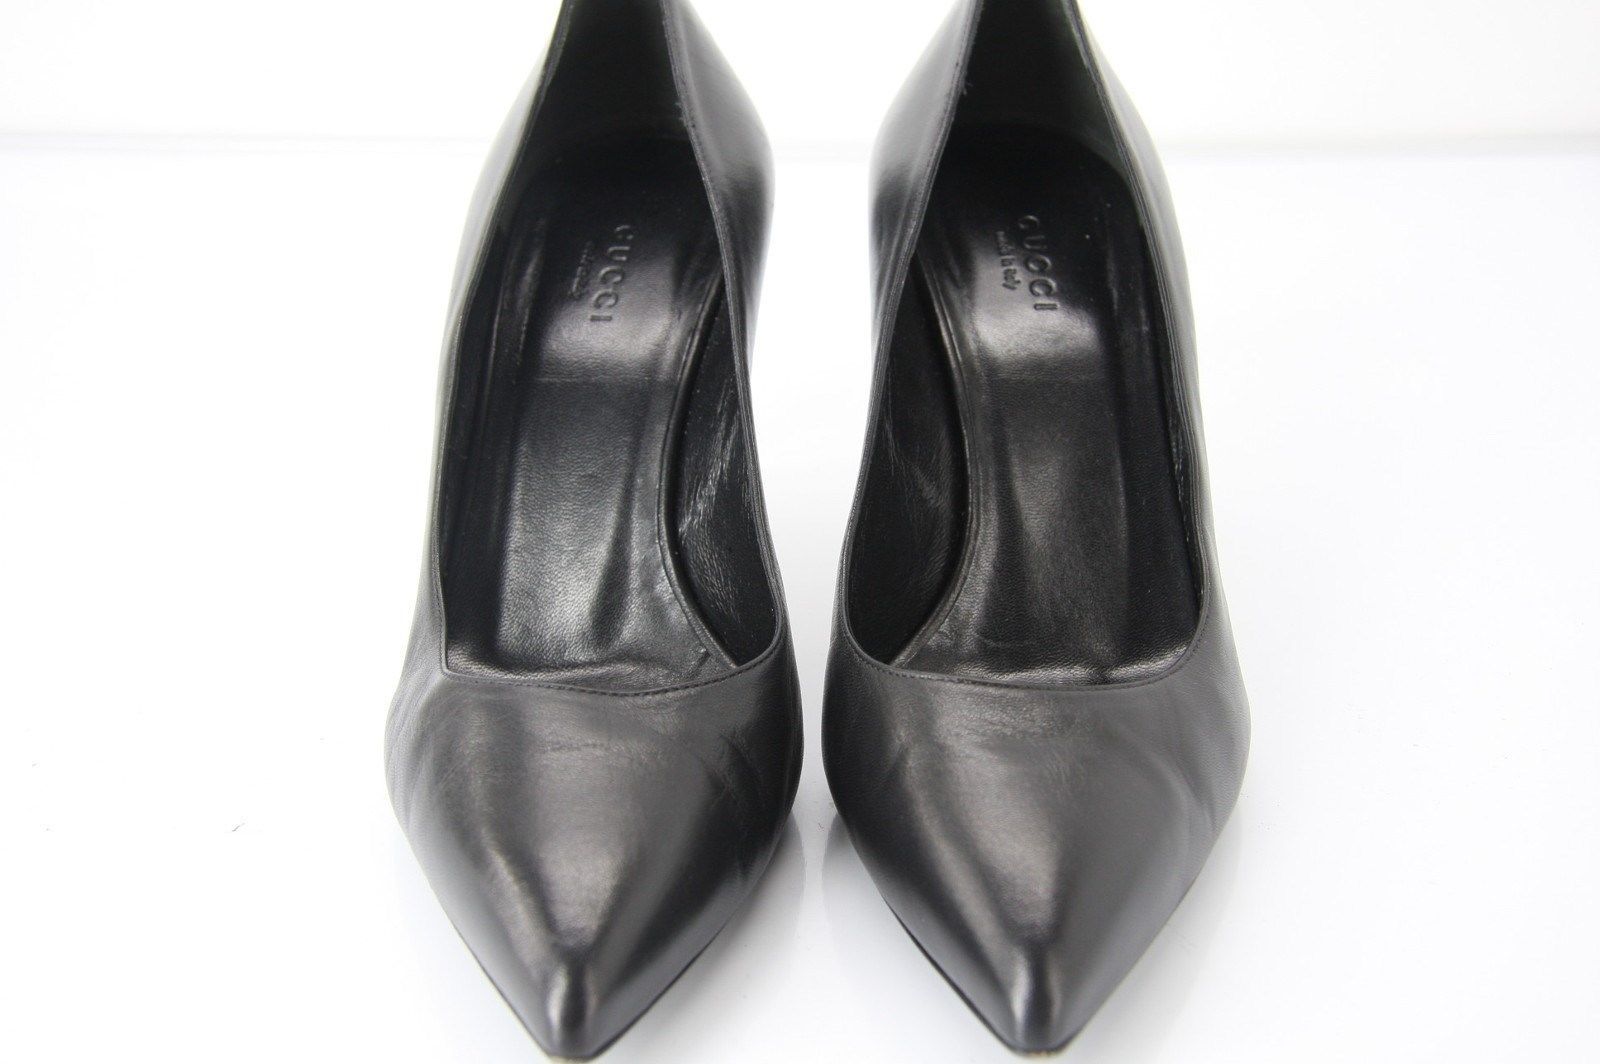 Gucci Black Leather 'Brooke' Pointed Toe High Heel Pumps Size 38.5 New $635